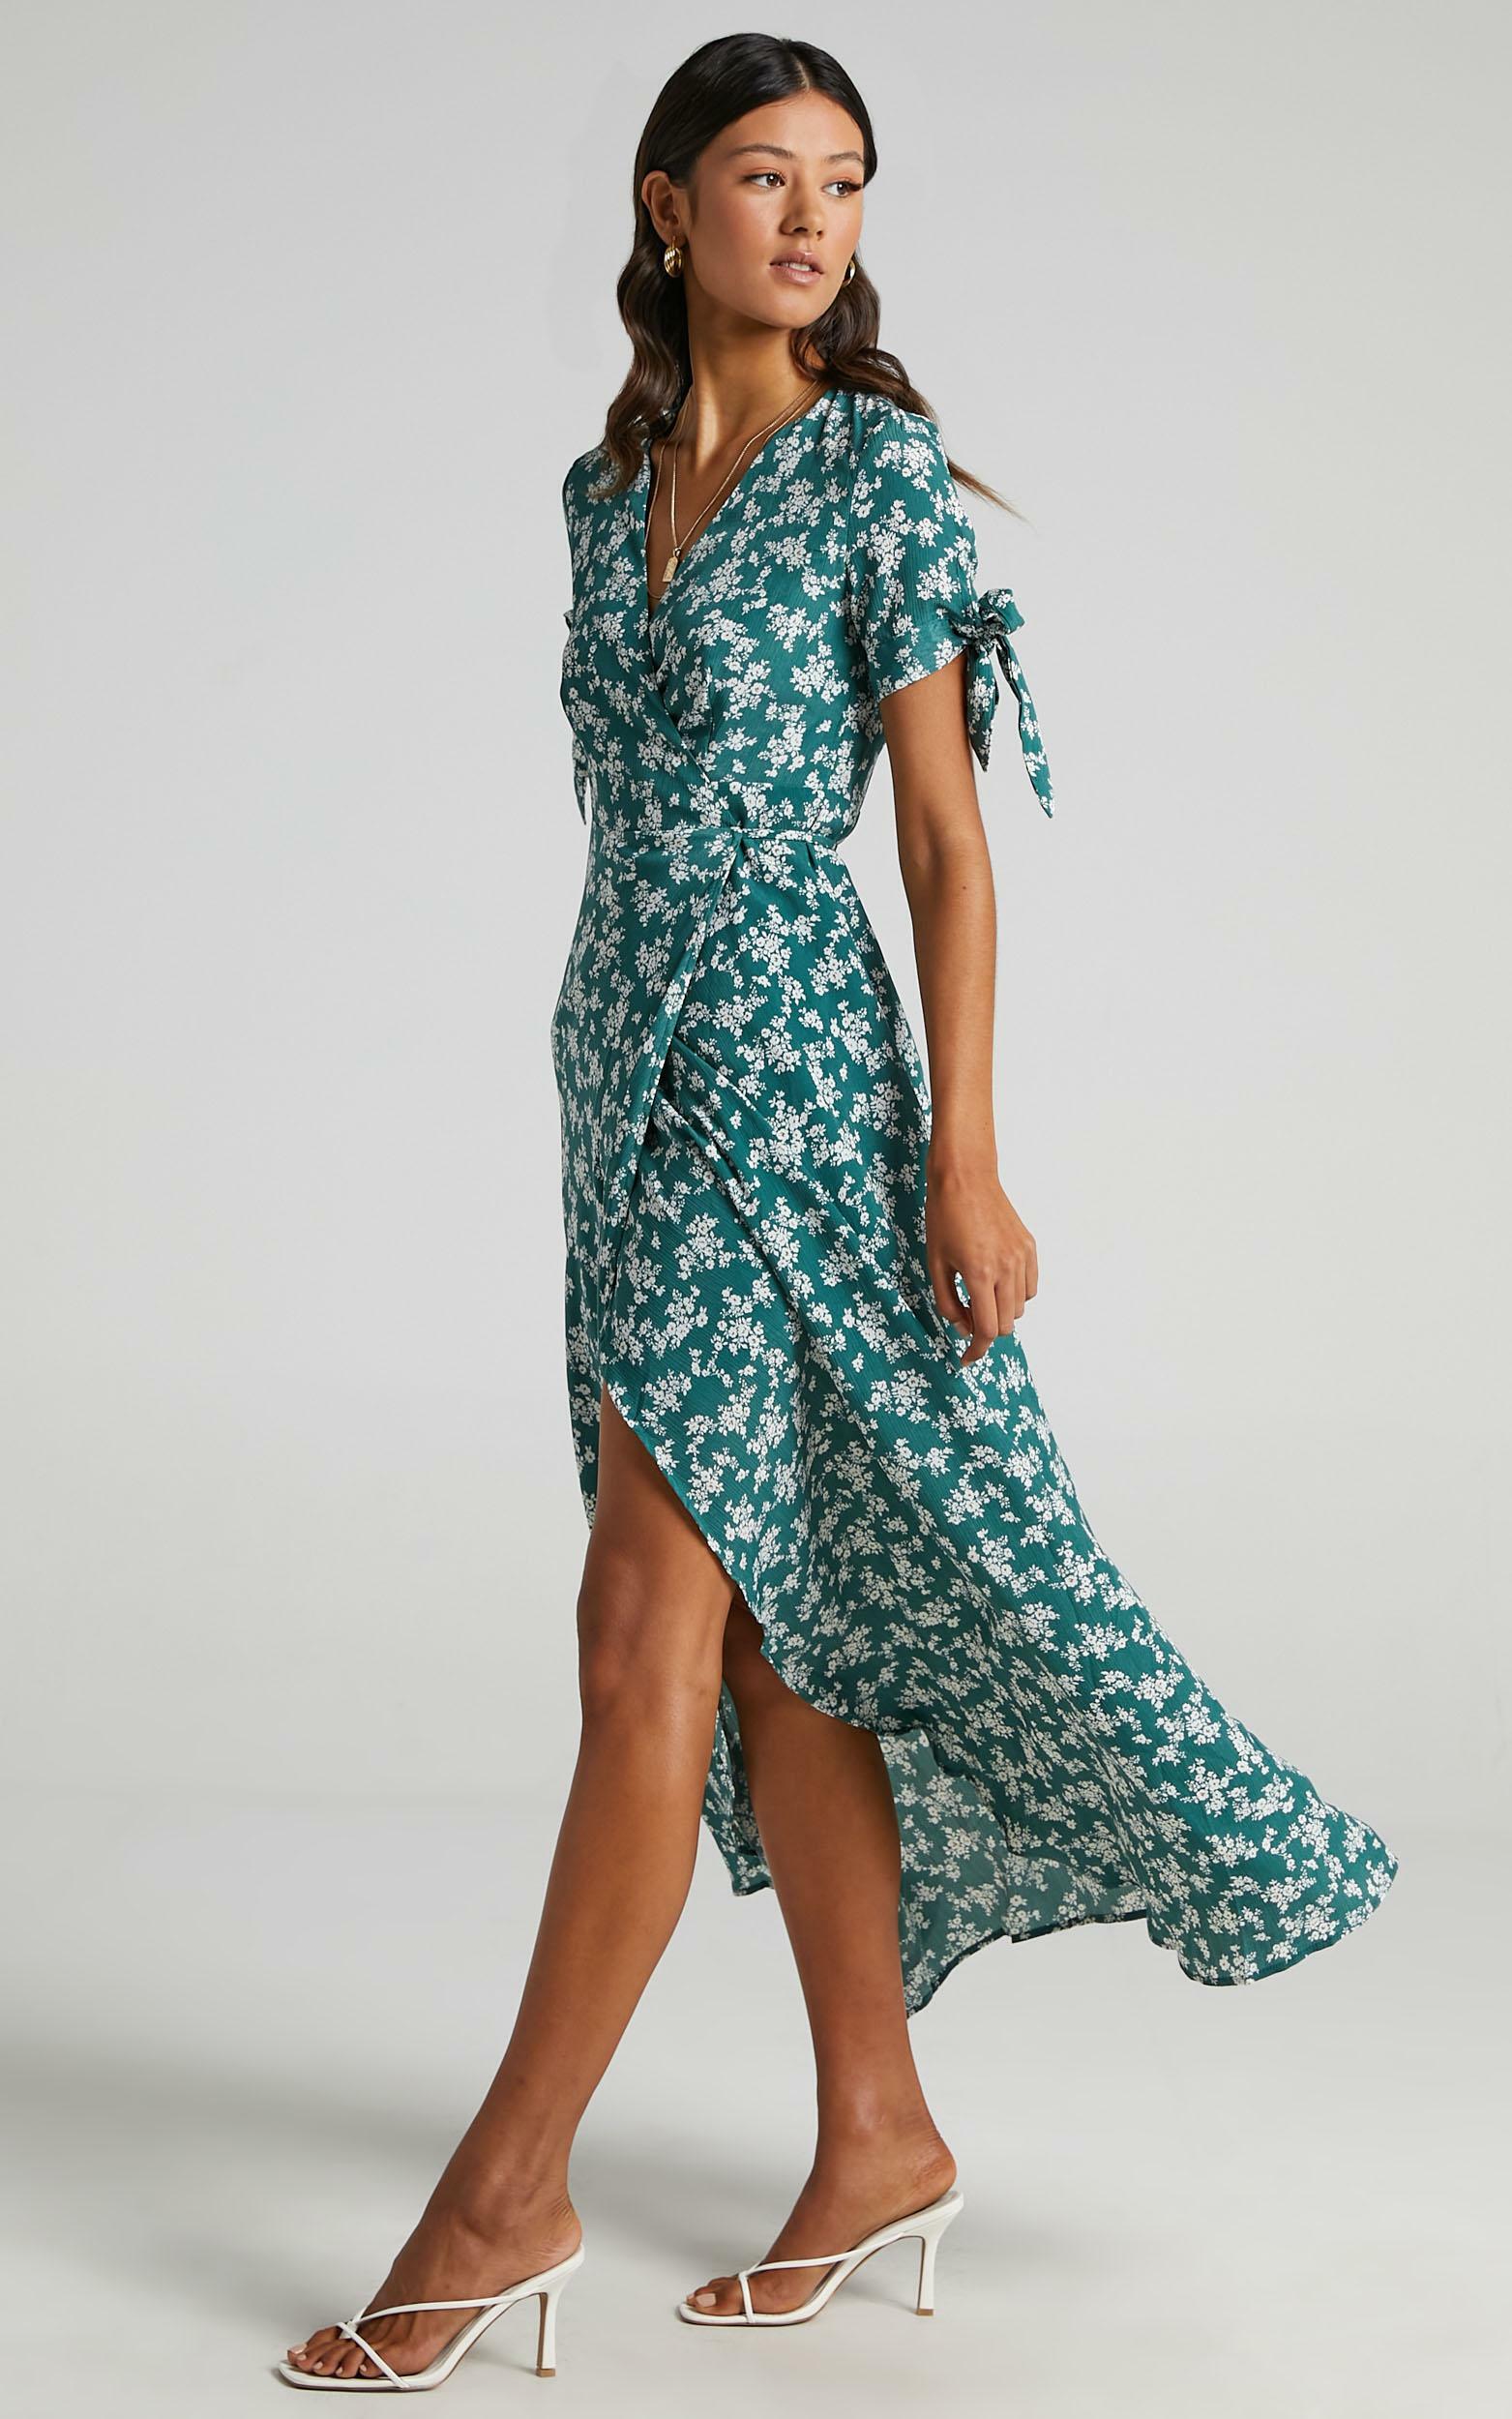 Picking It Up Wrap Maxi Dress in Teal Floral | Showpo